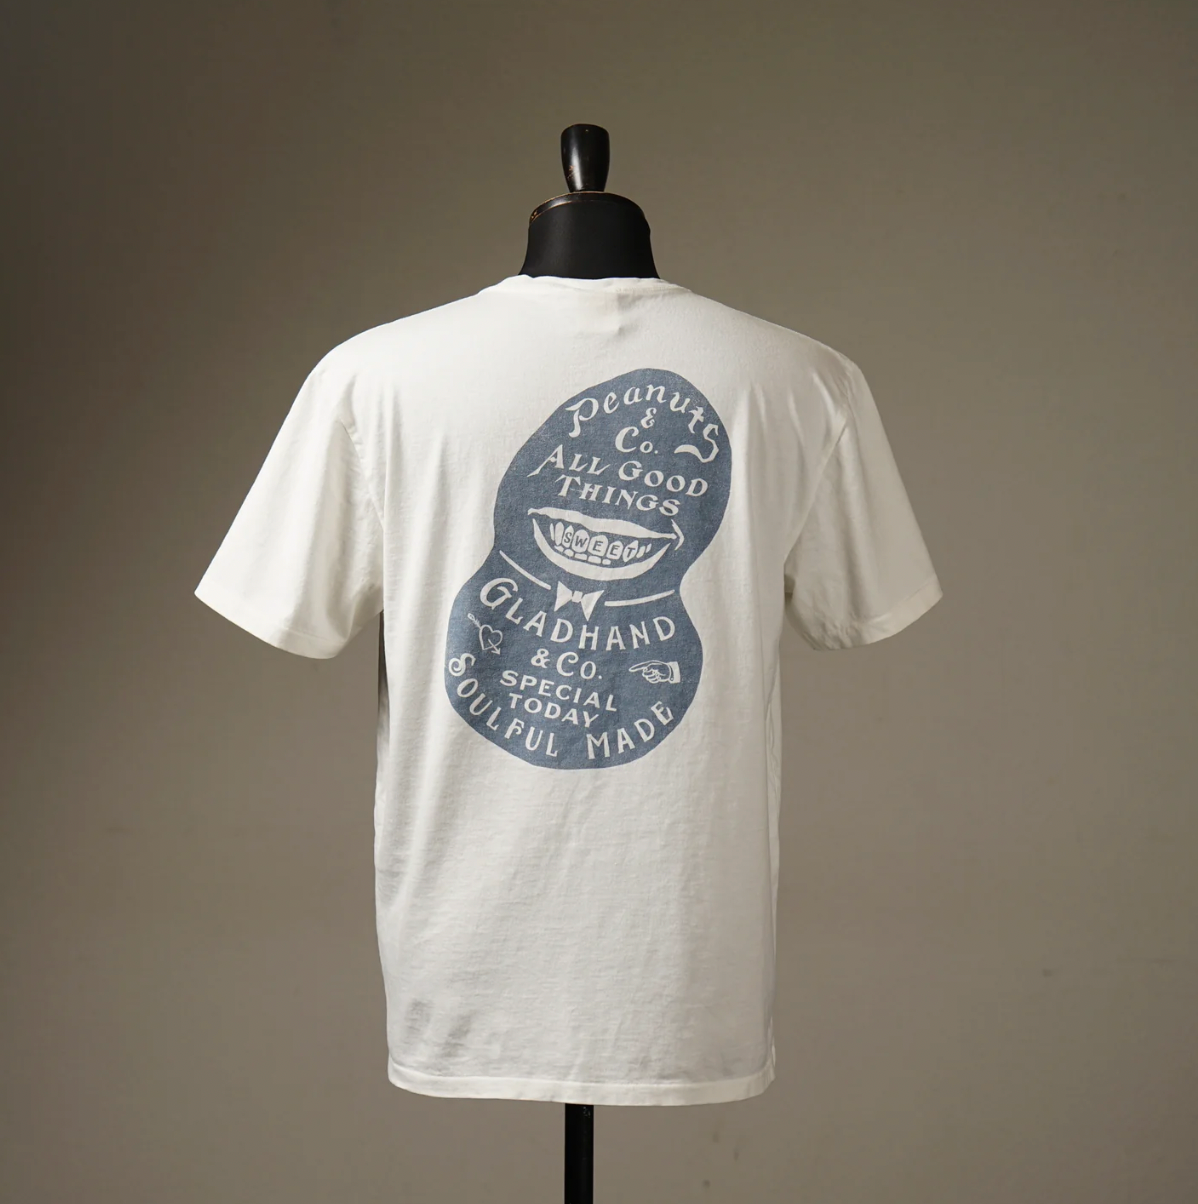 Peanuts & Co × GLADHAND & Co. Mr. SMILEY T-SHIRT - White